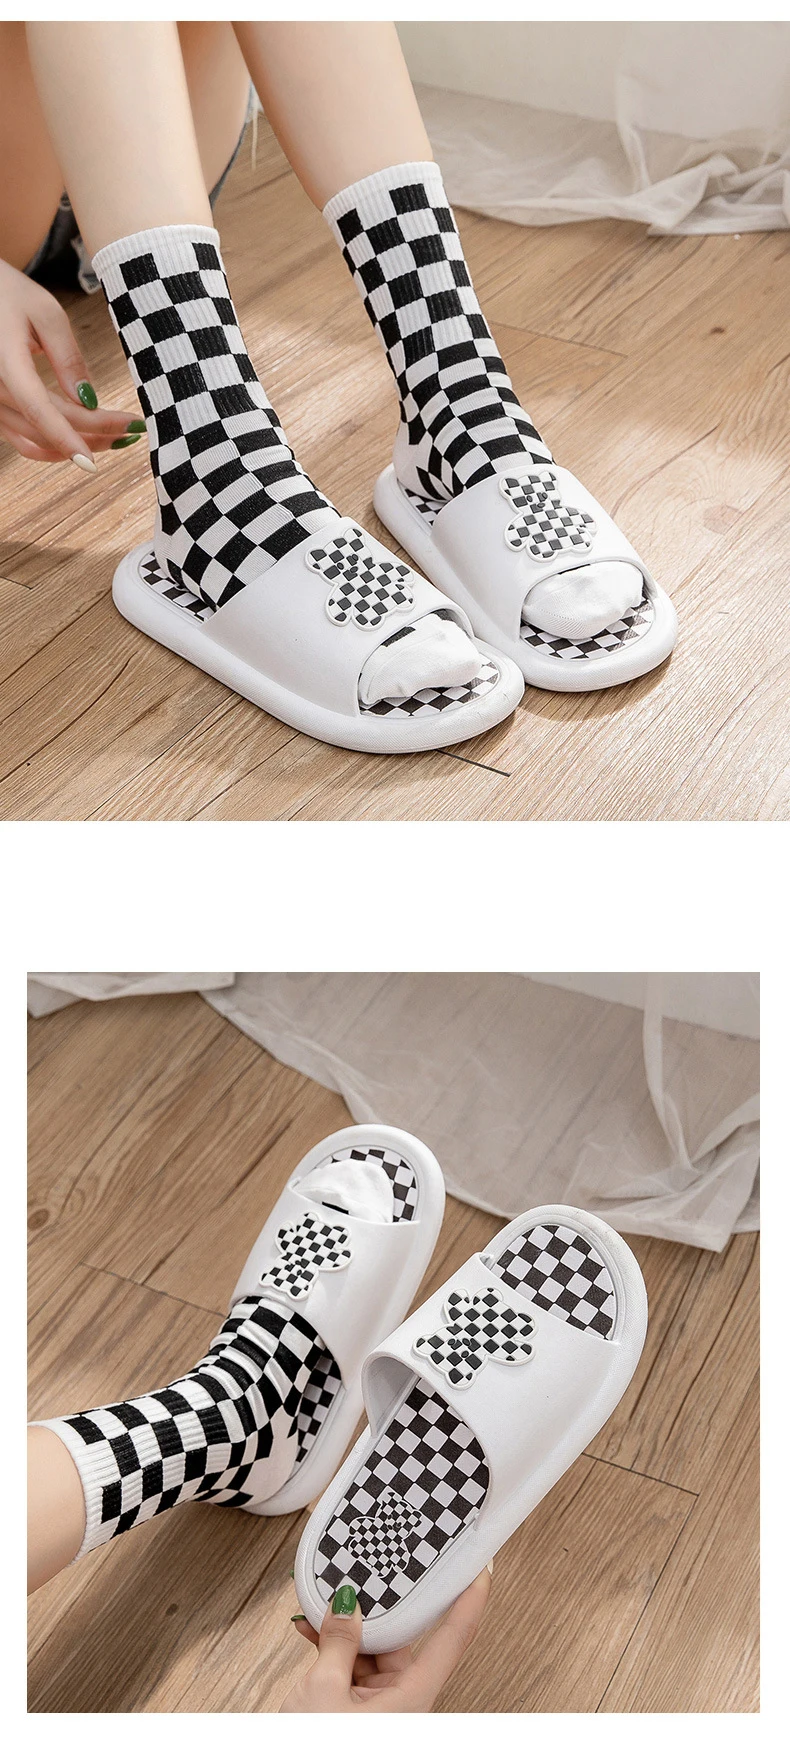 New Chess Plaid Bear Couple Slippers Outdoor Indoor Non-slip Soft Sole Girl Slippers Men